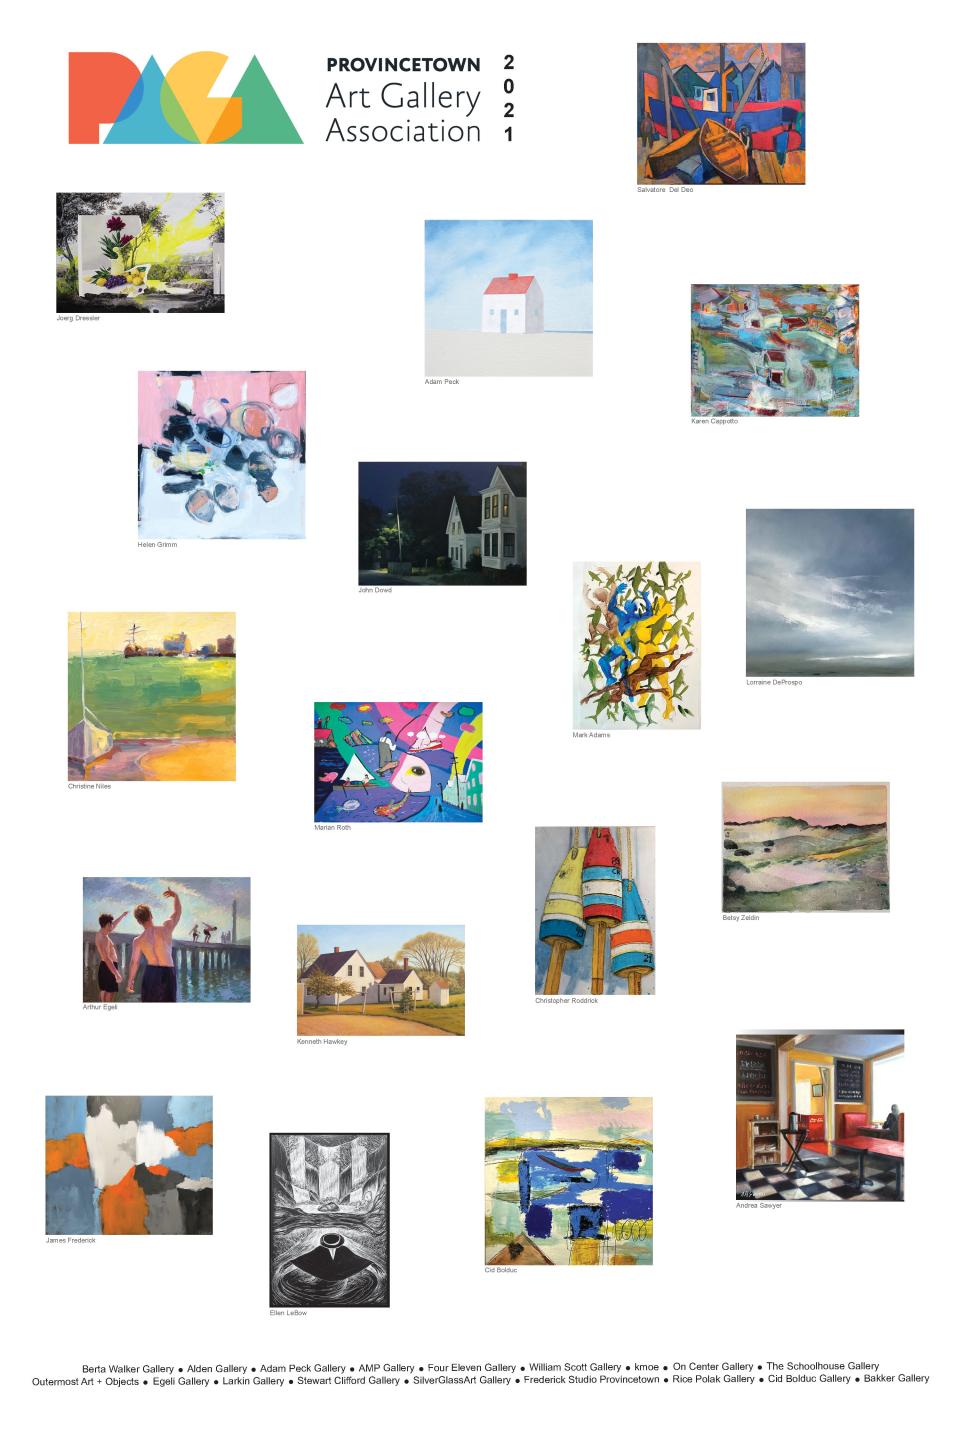 This new Provincetown Art Gallery Association poster features work by 18 artists from 18 different galleries, and is being sold signed and unsigned as a fundraiser.